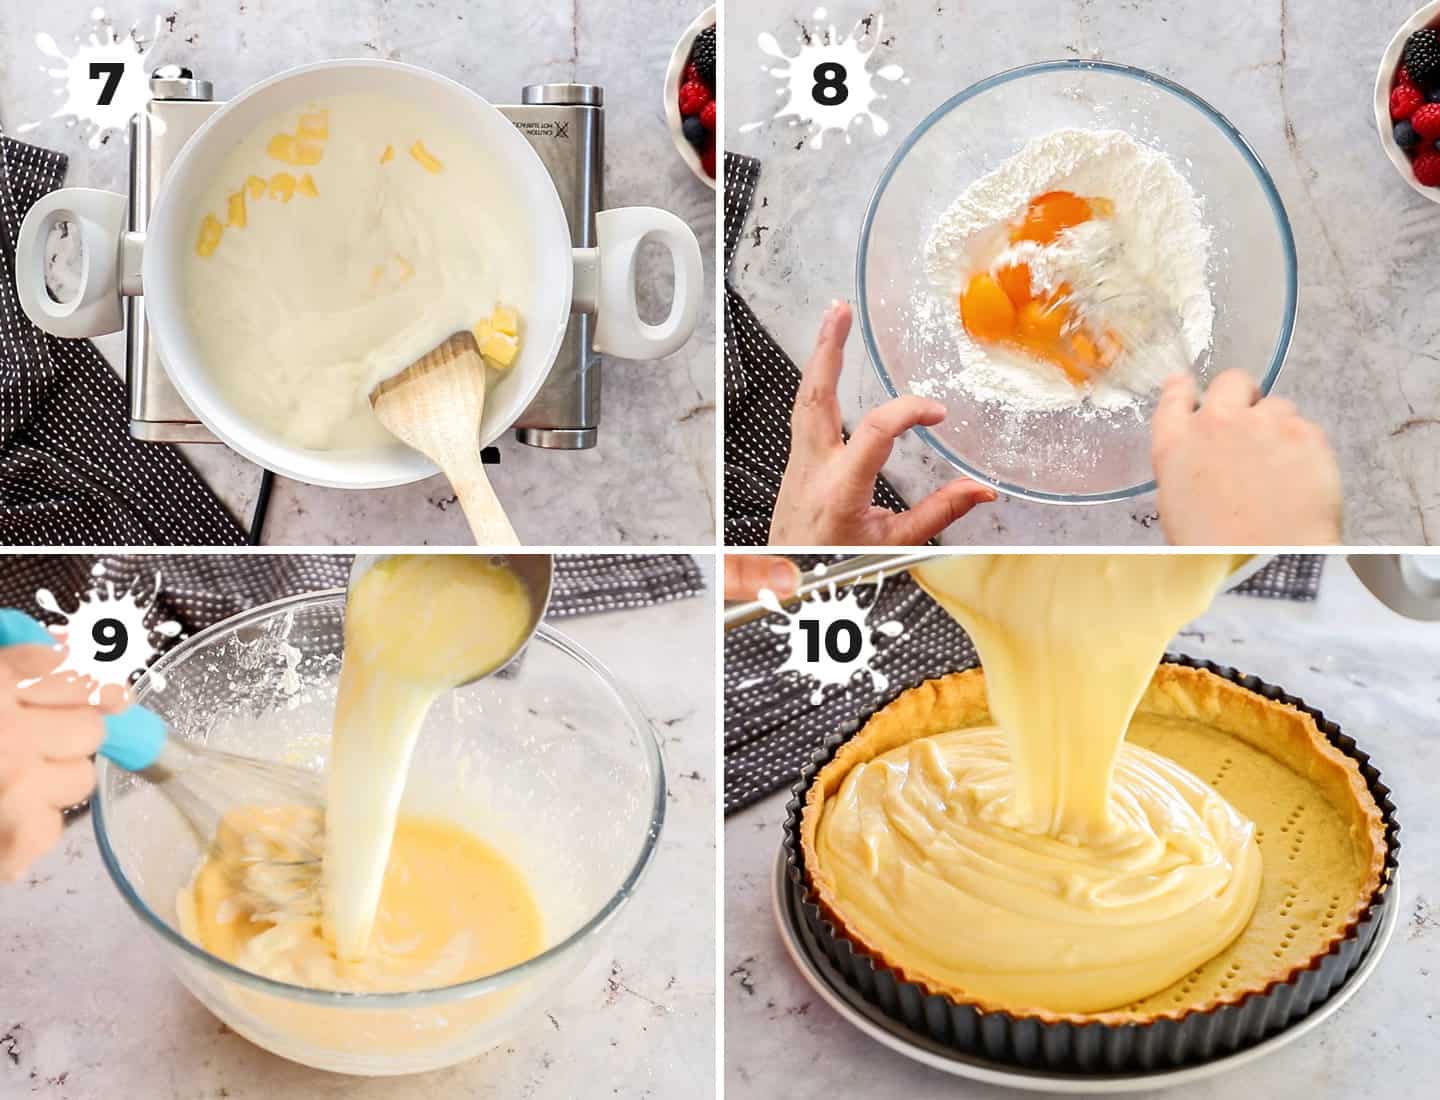 A collage of 4 images showing how to make the custard tart filling.